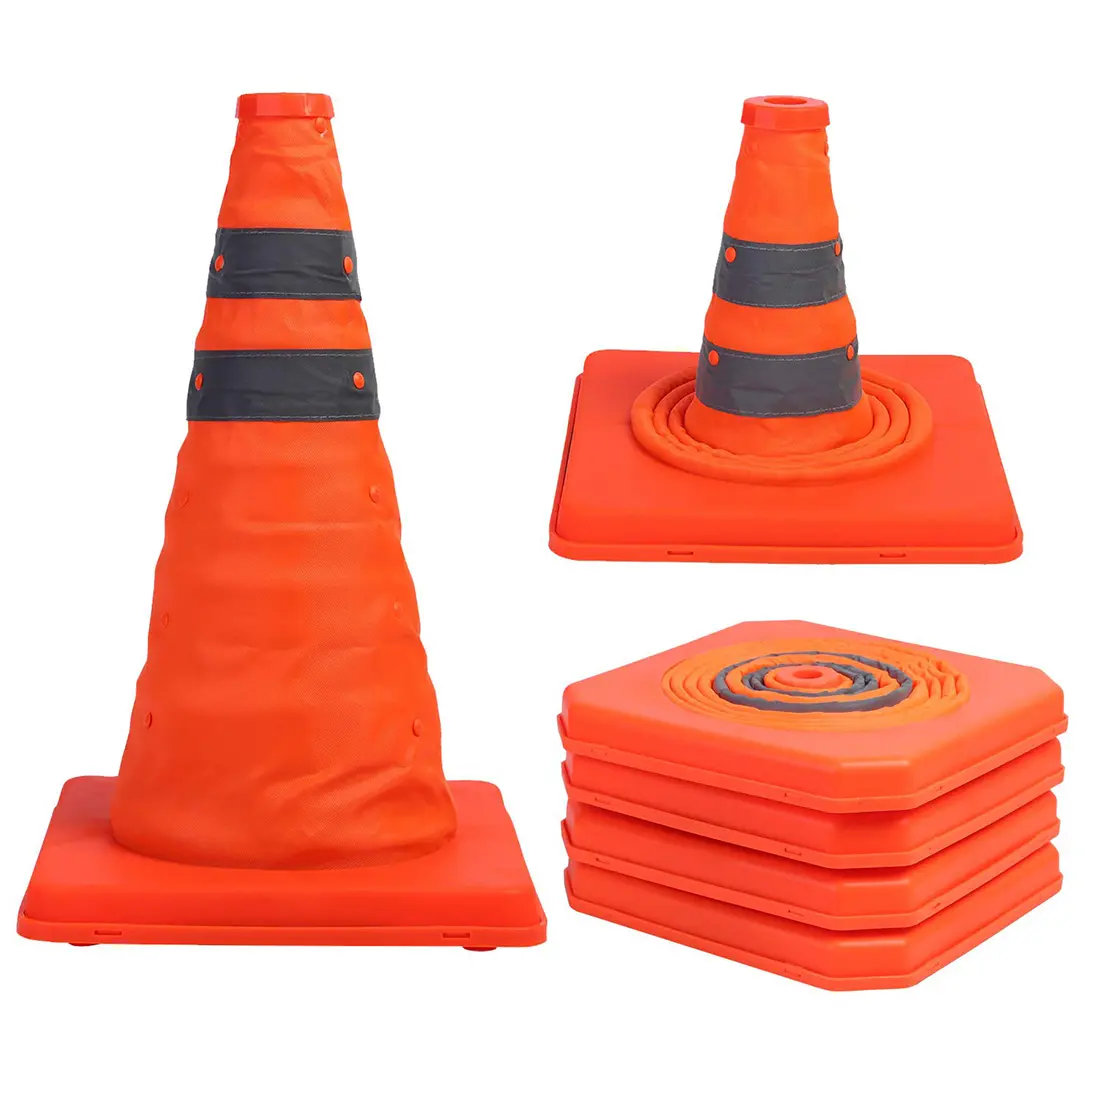 EONBON Silicone Rubber Tripod Road Collapsible Ice Cream Bucket Safety Facilities Collapsible Traffic Cones